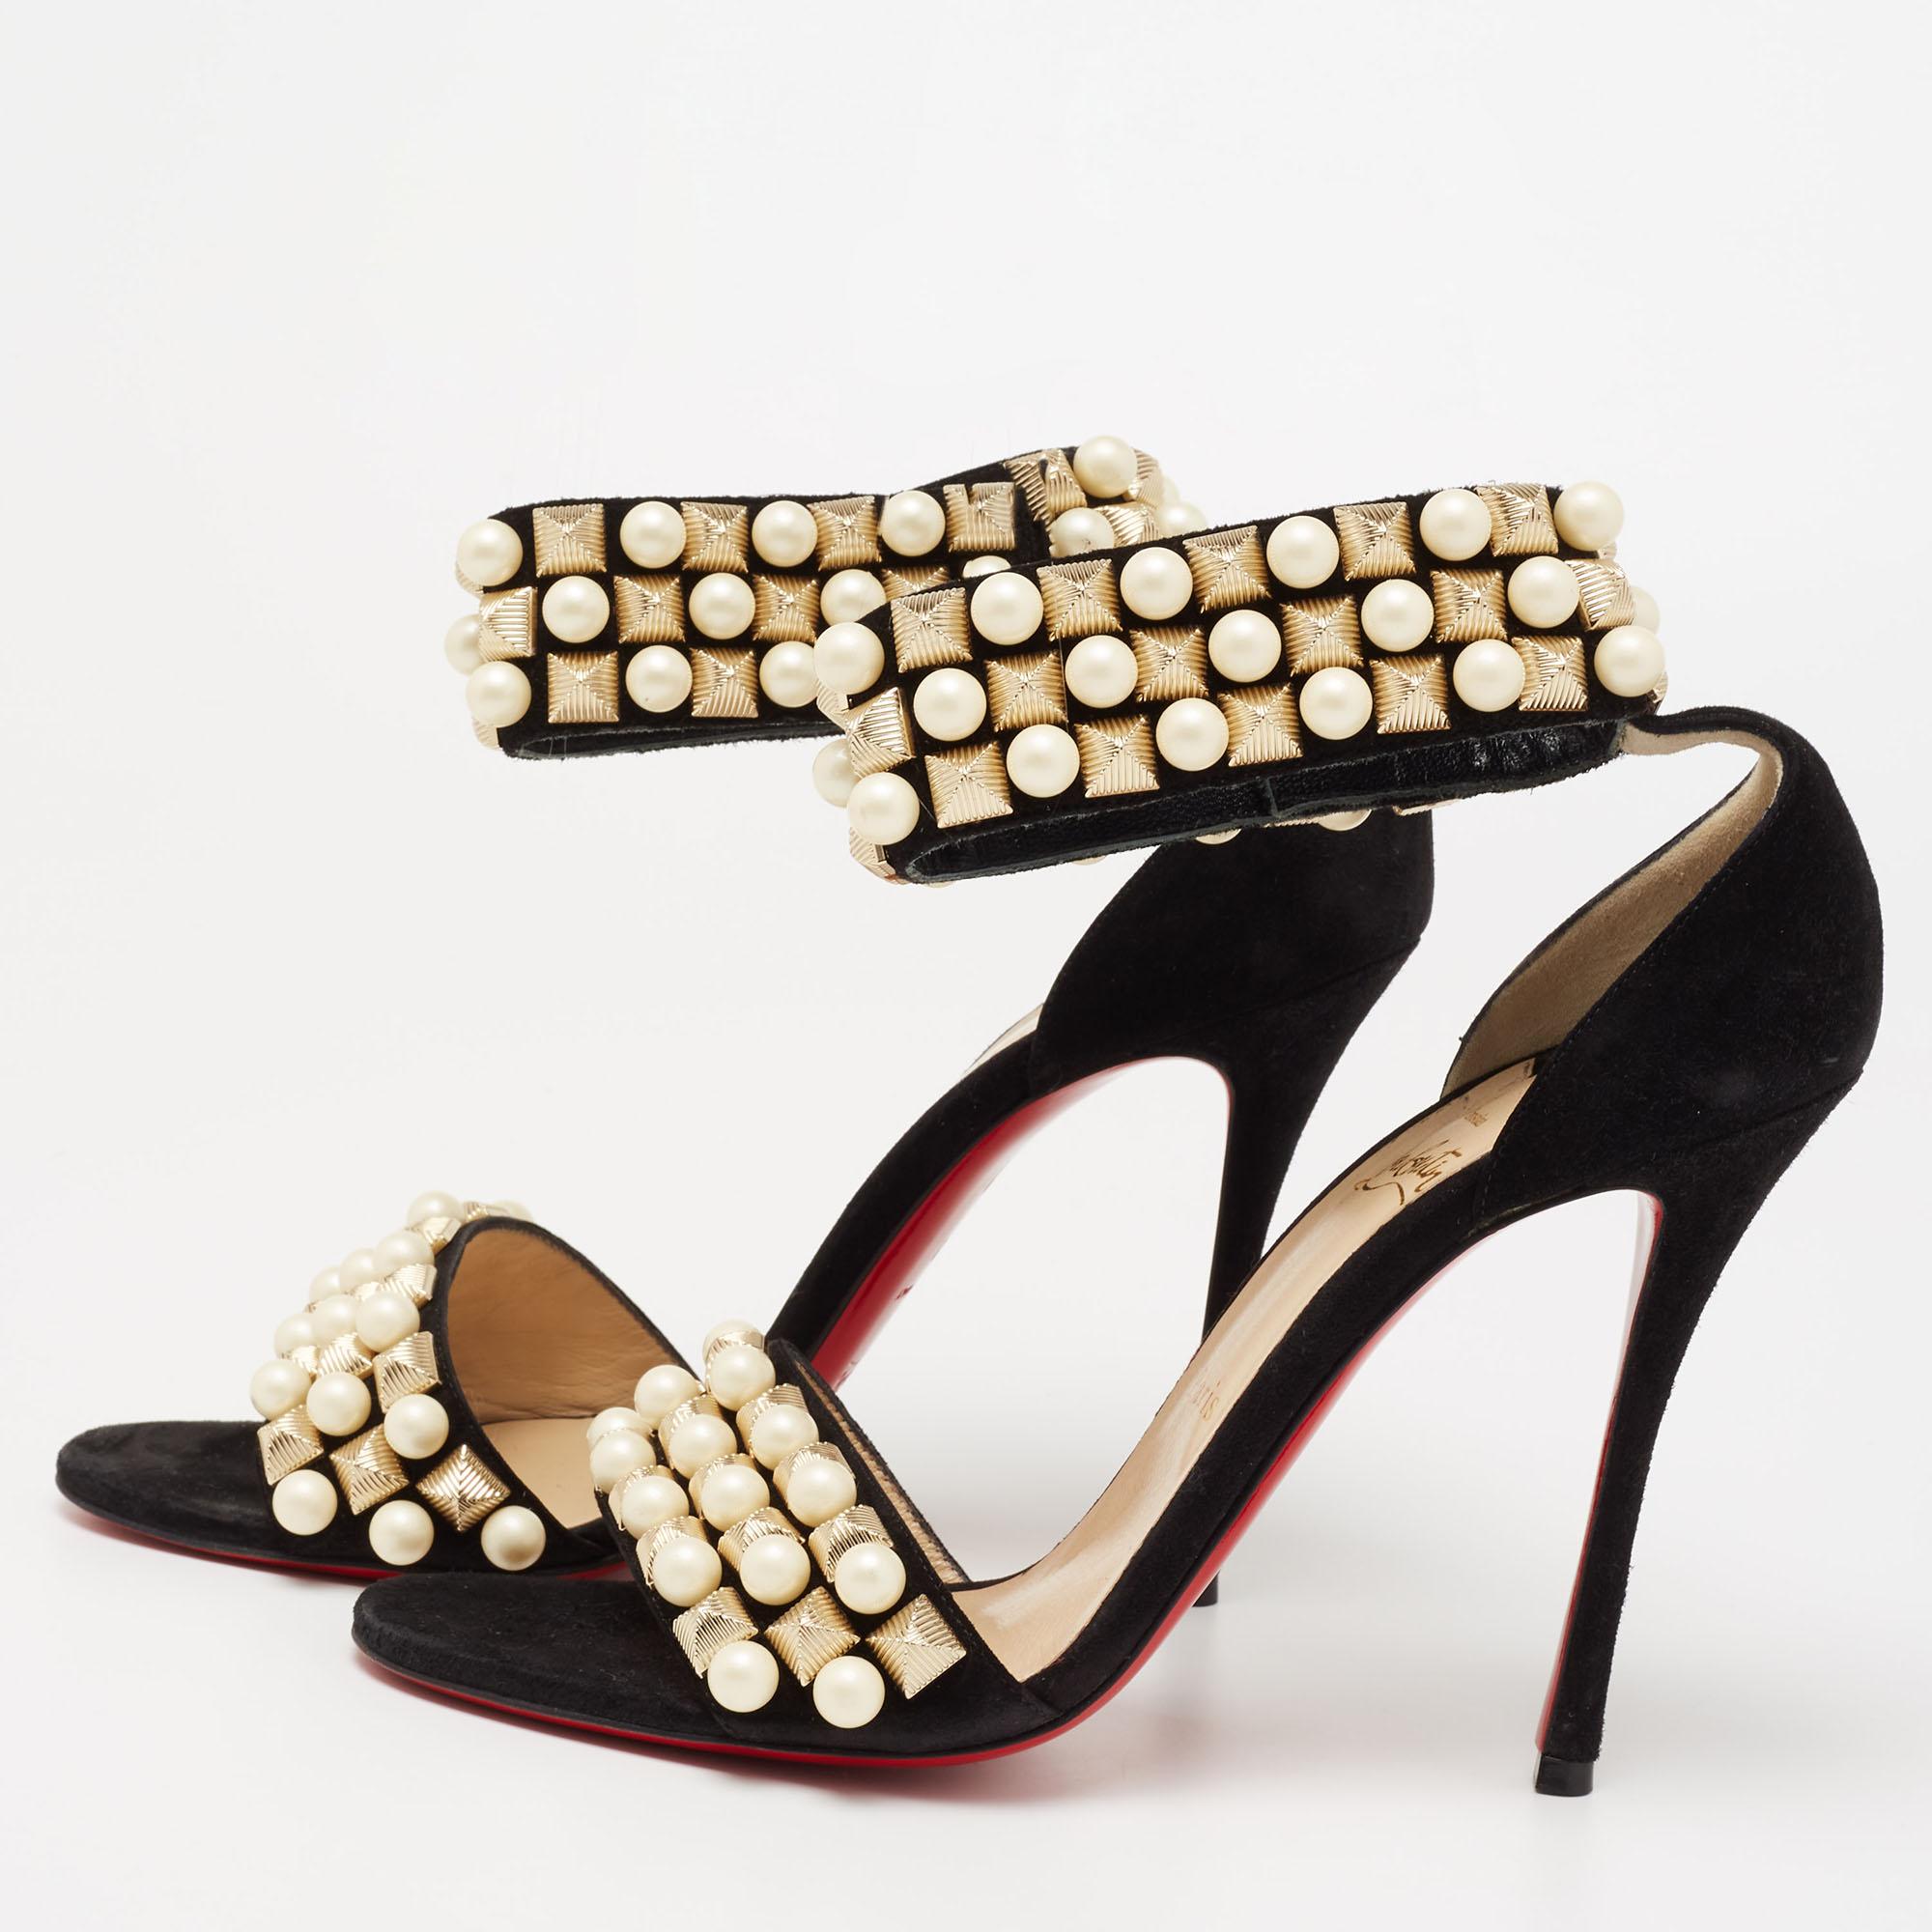 These Christian Louboutin sandals are a delightful creation. Made from suede, their vamps and ankle strap are beautifully decorated with faux pearls and embellishments. The signature red-lacquered sole of this pair signifies sophistication, and its